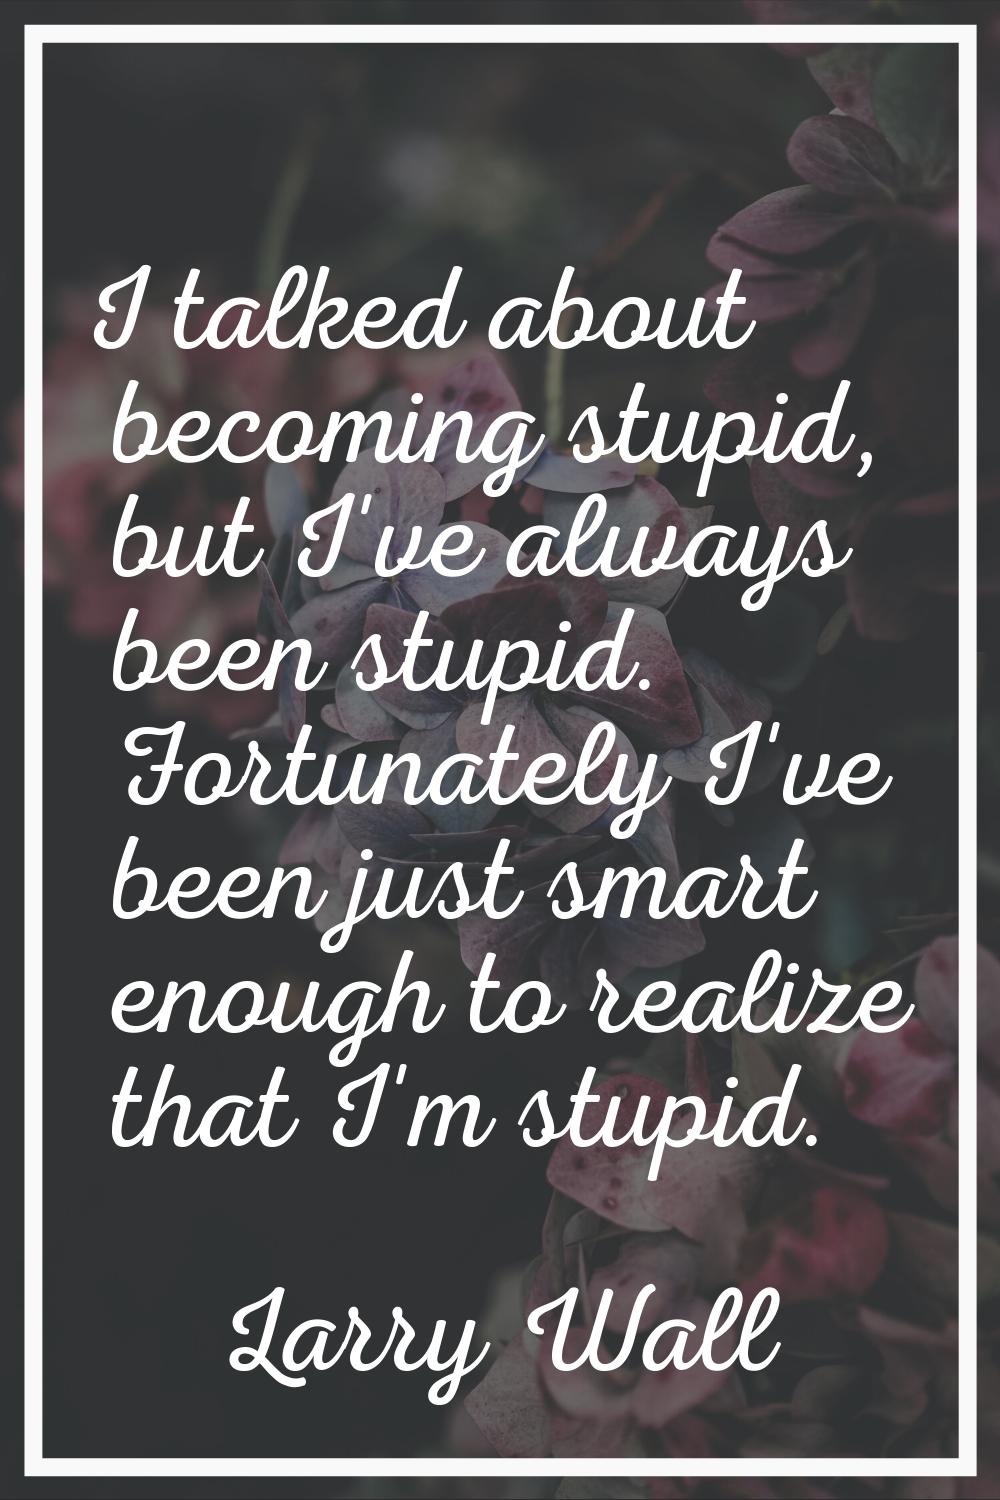 I talked about becoming stupid, but I've always been stupid. Fortunately I've been just smart enoug